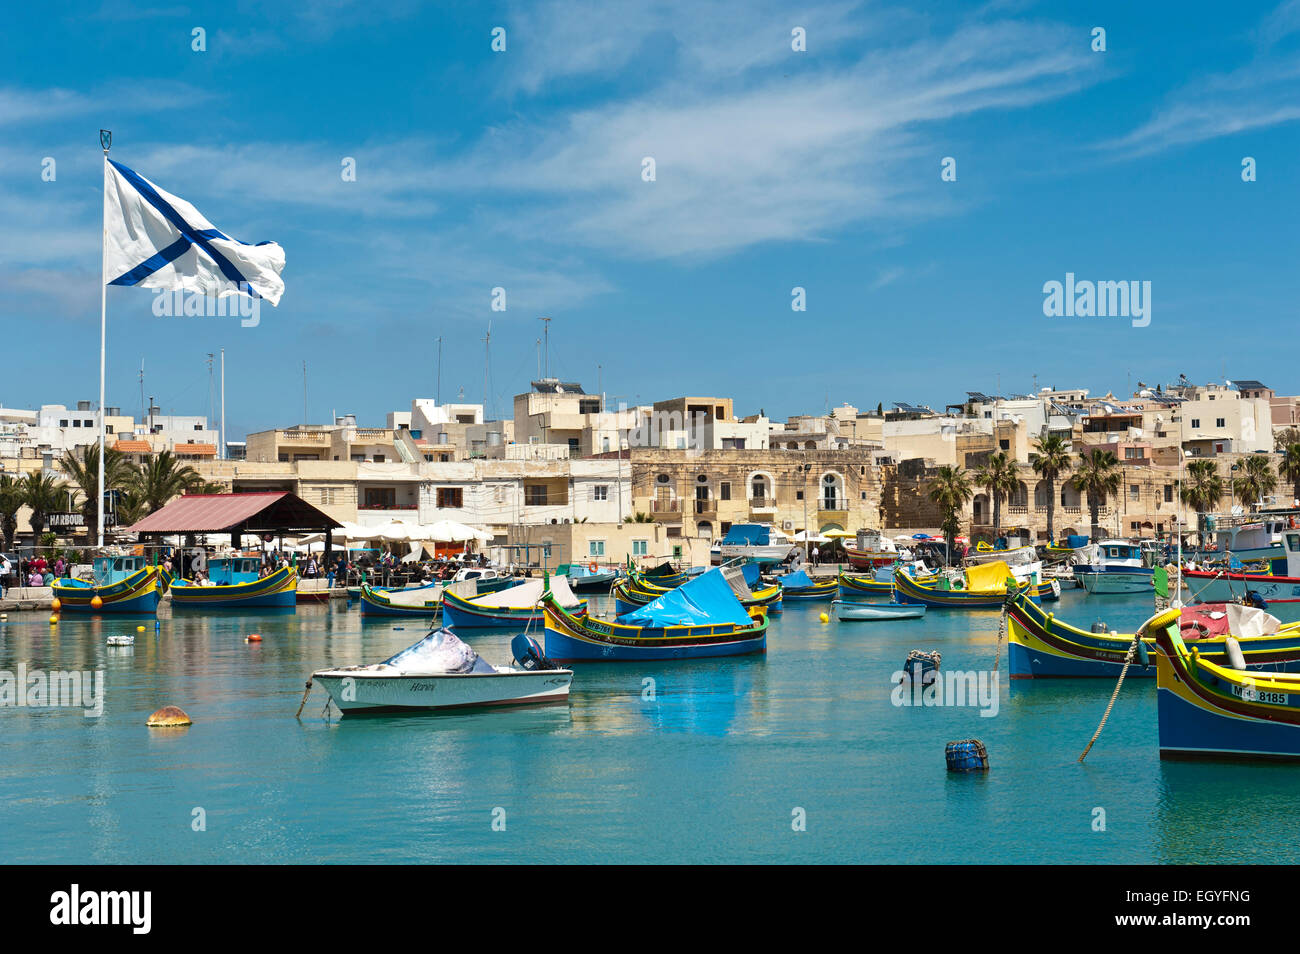 Colorfully painted traditional fishing boats, Luzzu, harbour of Marsaxlokk, Malta Stock Photo